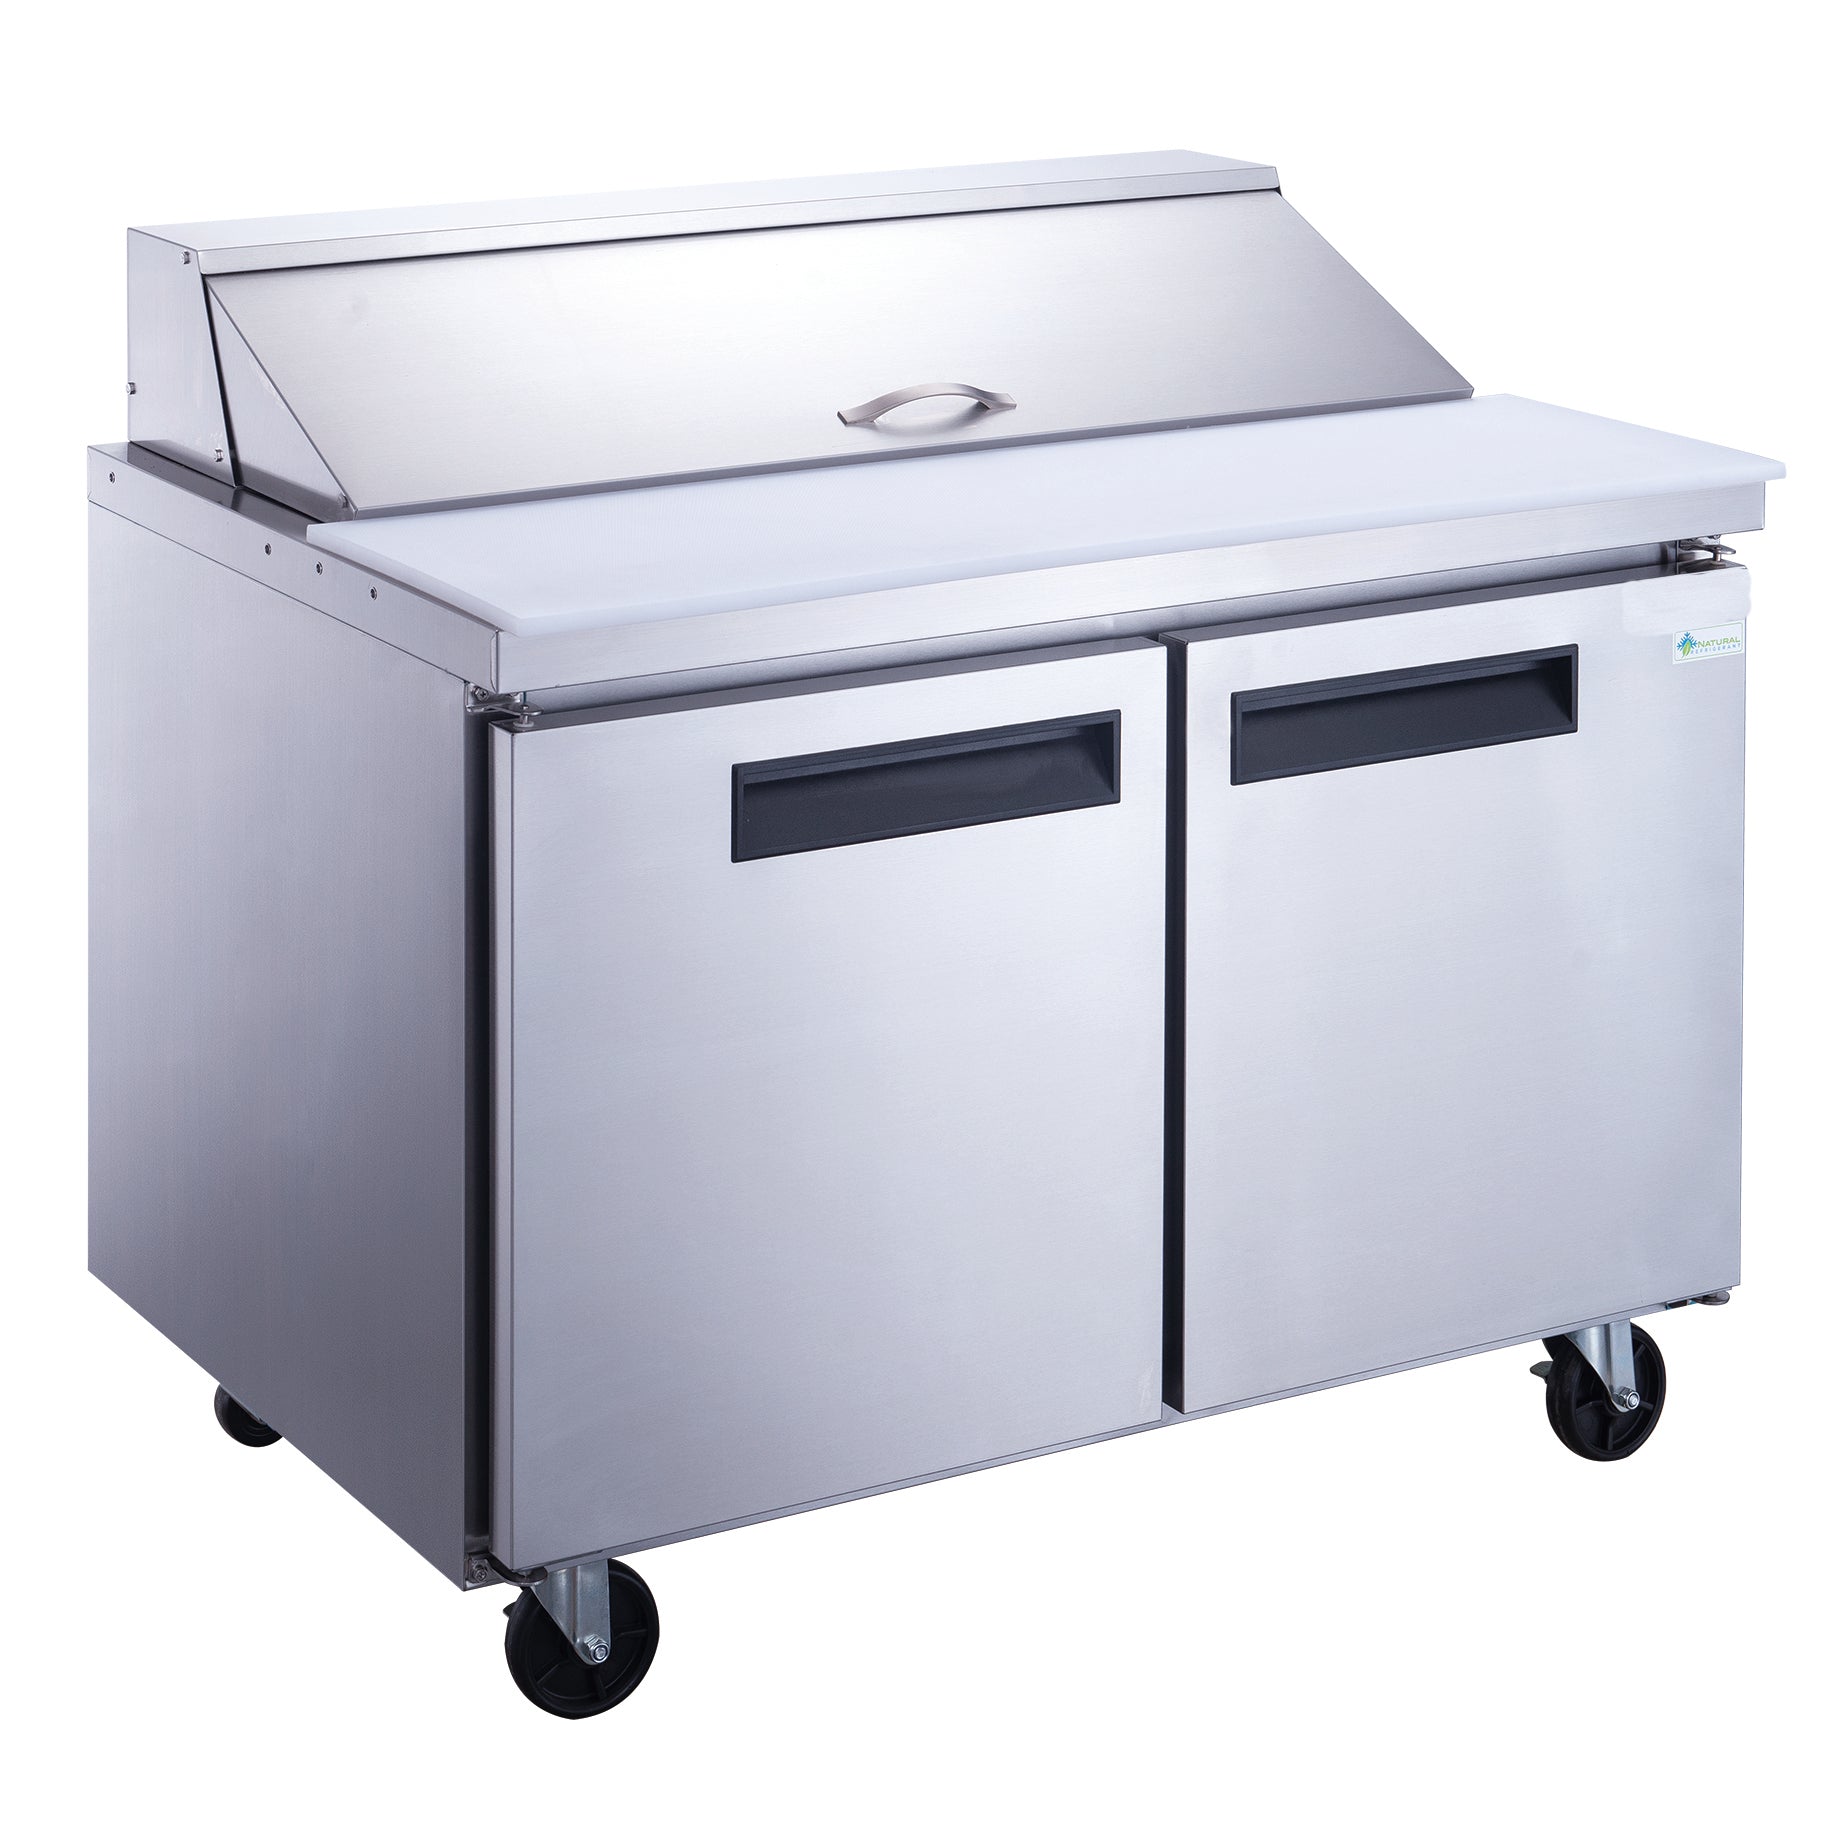 Chef AAA - TSP48, Commercial 48" 12 Pan Salad Sandwich Food Prep Table Refrigerator 11.4cu.ft.